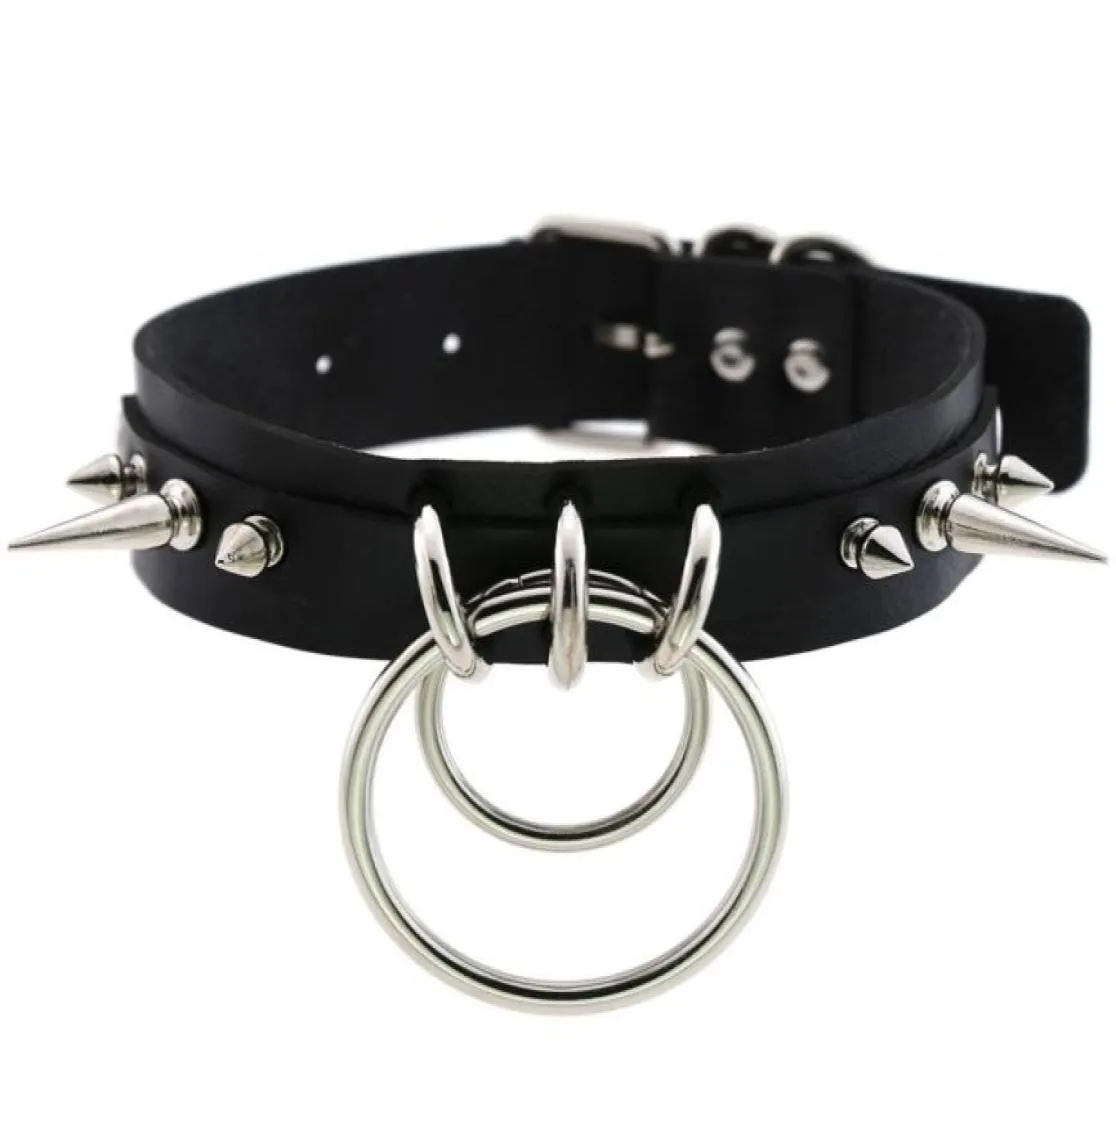 Kmvexo Punk Spike Metal Collar Girls Leather Harness Choker Necklace for Women Party Club ChockersゴシックジュエリーHarajuku 20197614785